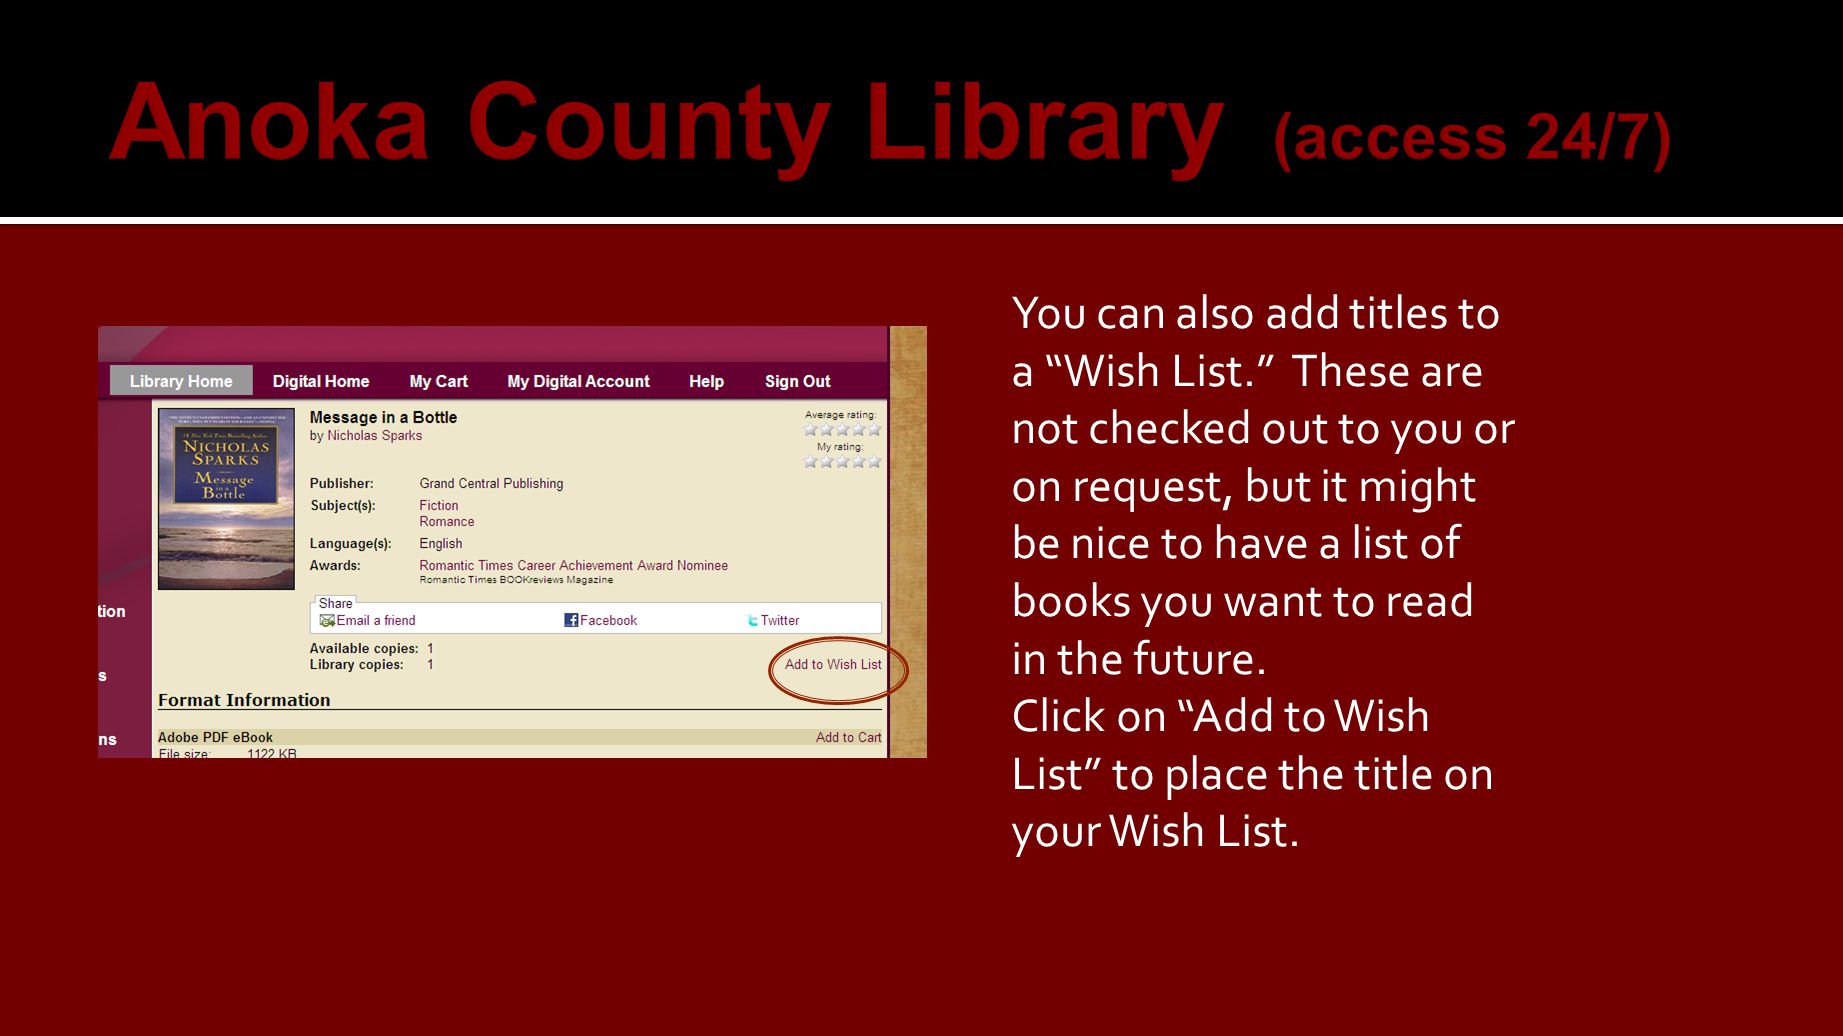 You can also add titles to a Wish List. These are not checked out to you or on request, but it might be nice to have a list of books you want to read in the future.